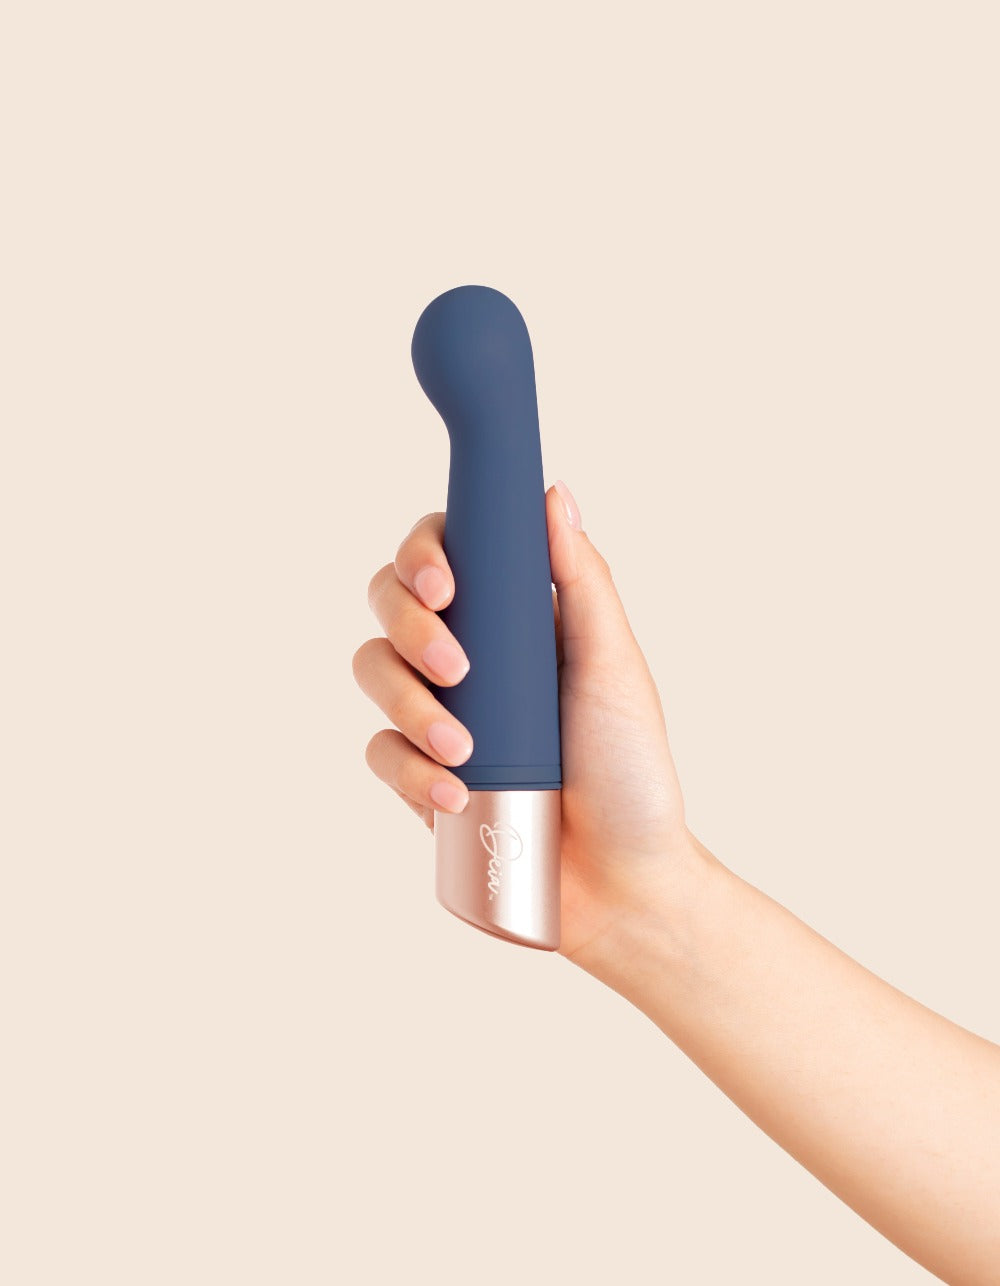 The Couple by Deia two-in-one vibrator being held upright in female hand